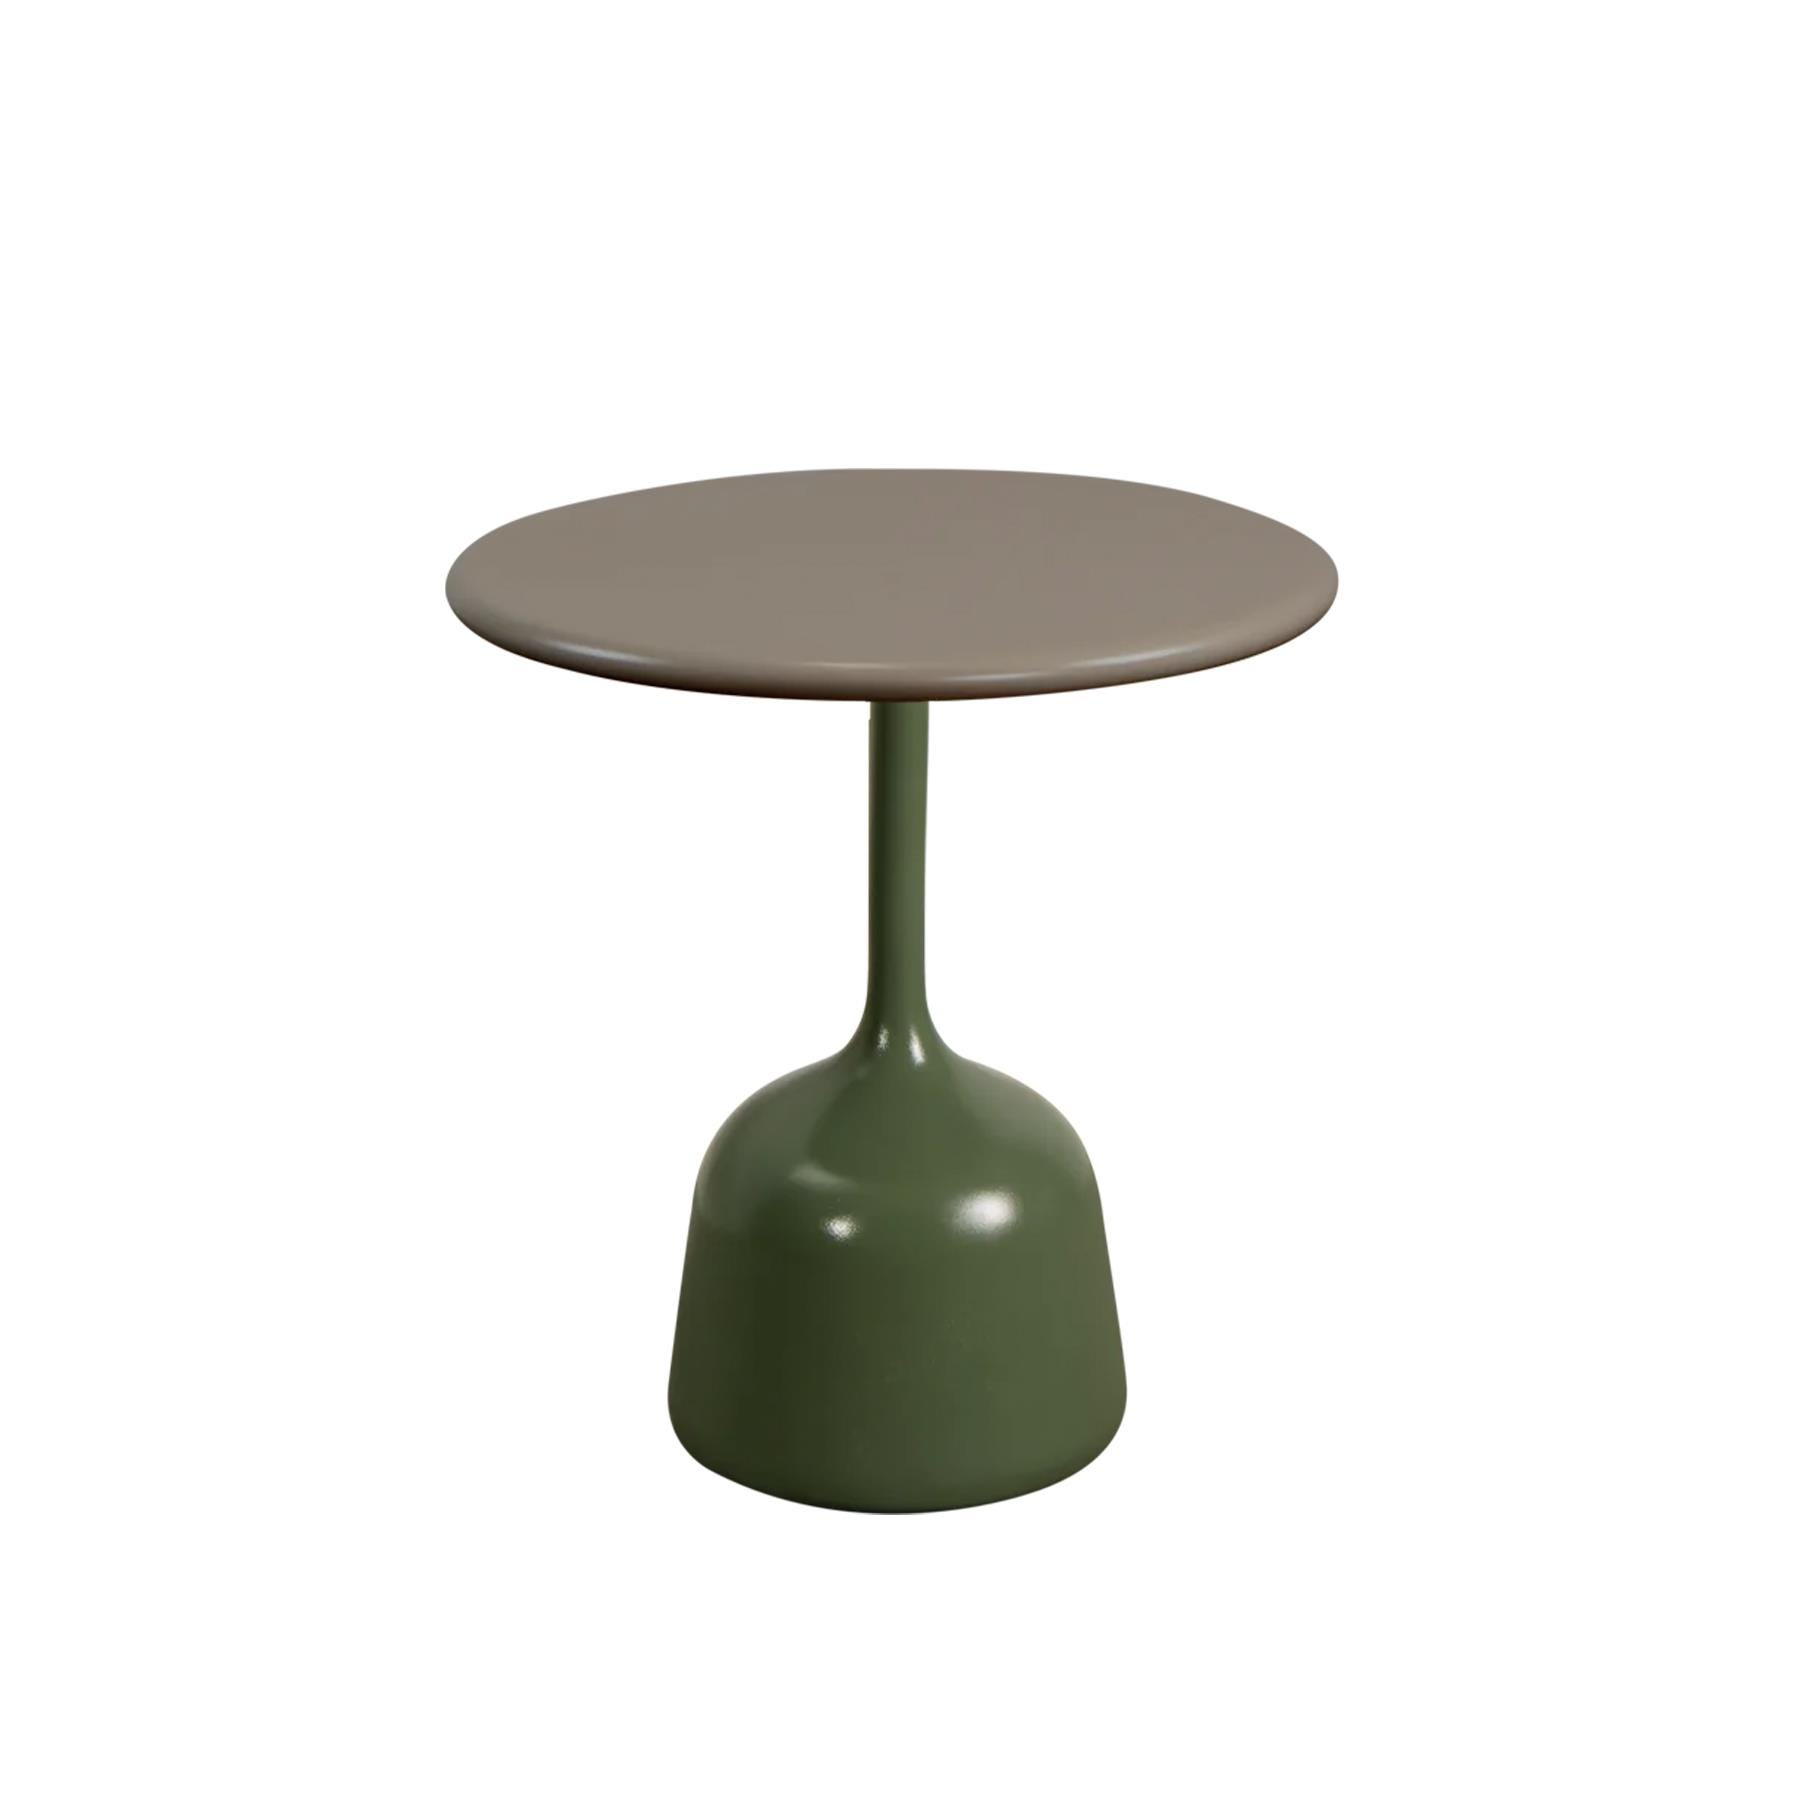 Caneline Glaze Coffee Table Small Olive Green Base Taupe Aluminium Brown Designer Furniture From Holloways Of Ludlow